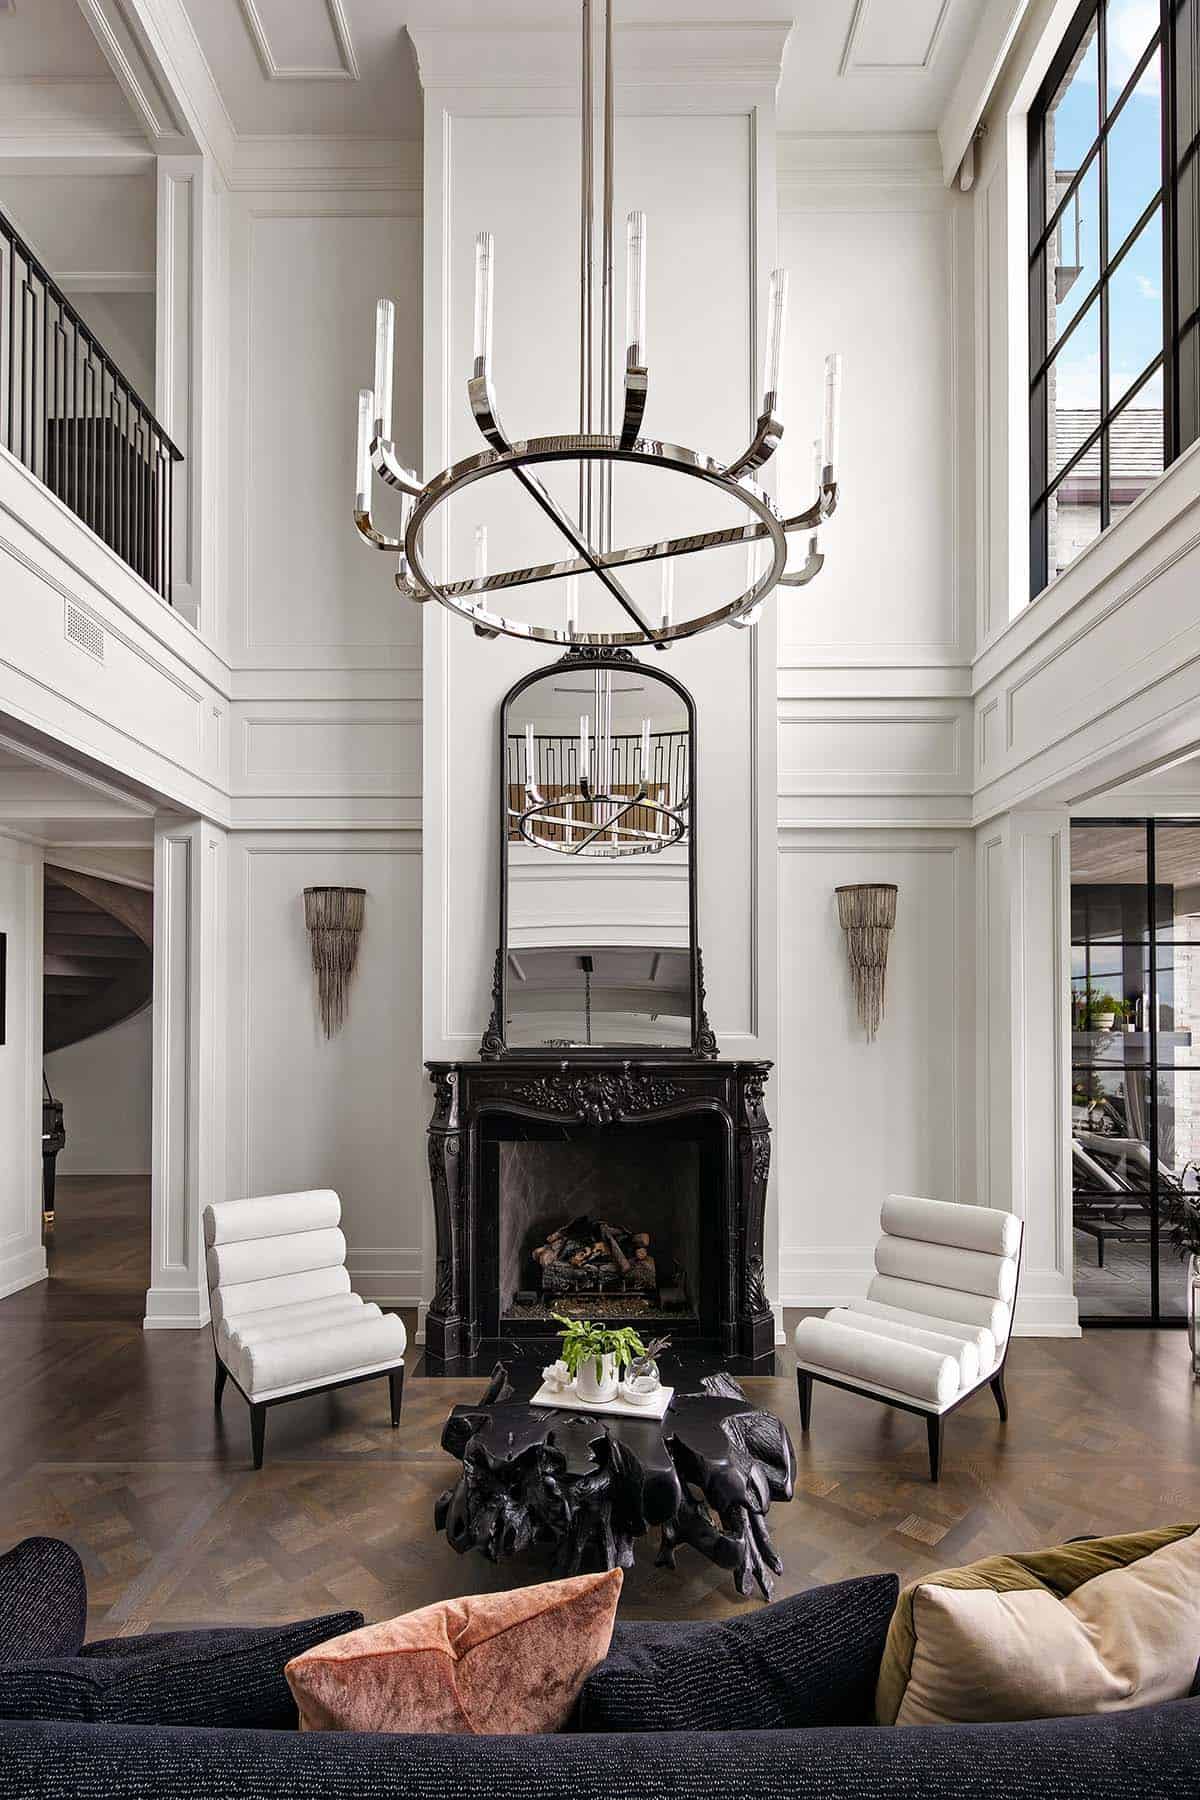 transitional style double volume living room with a fireplace